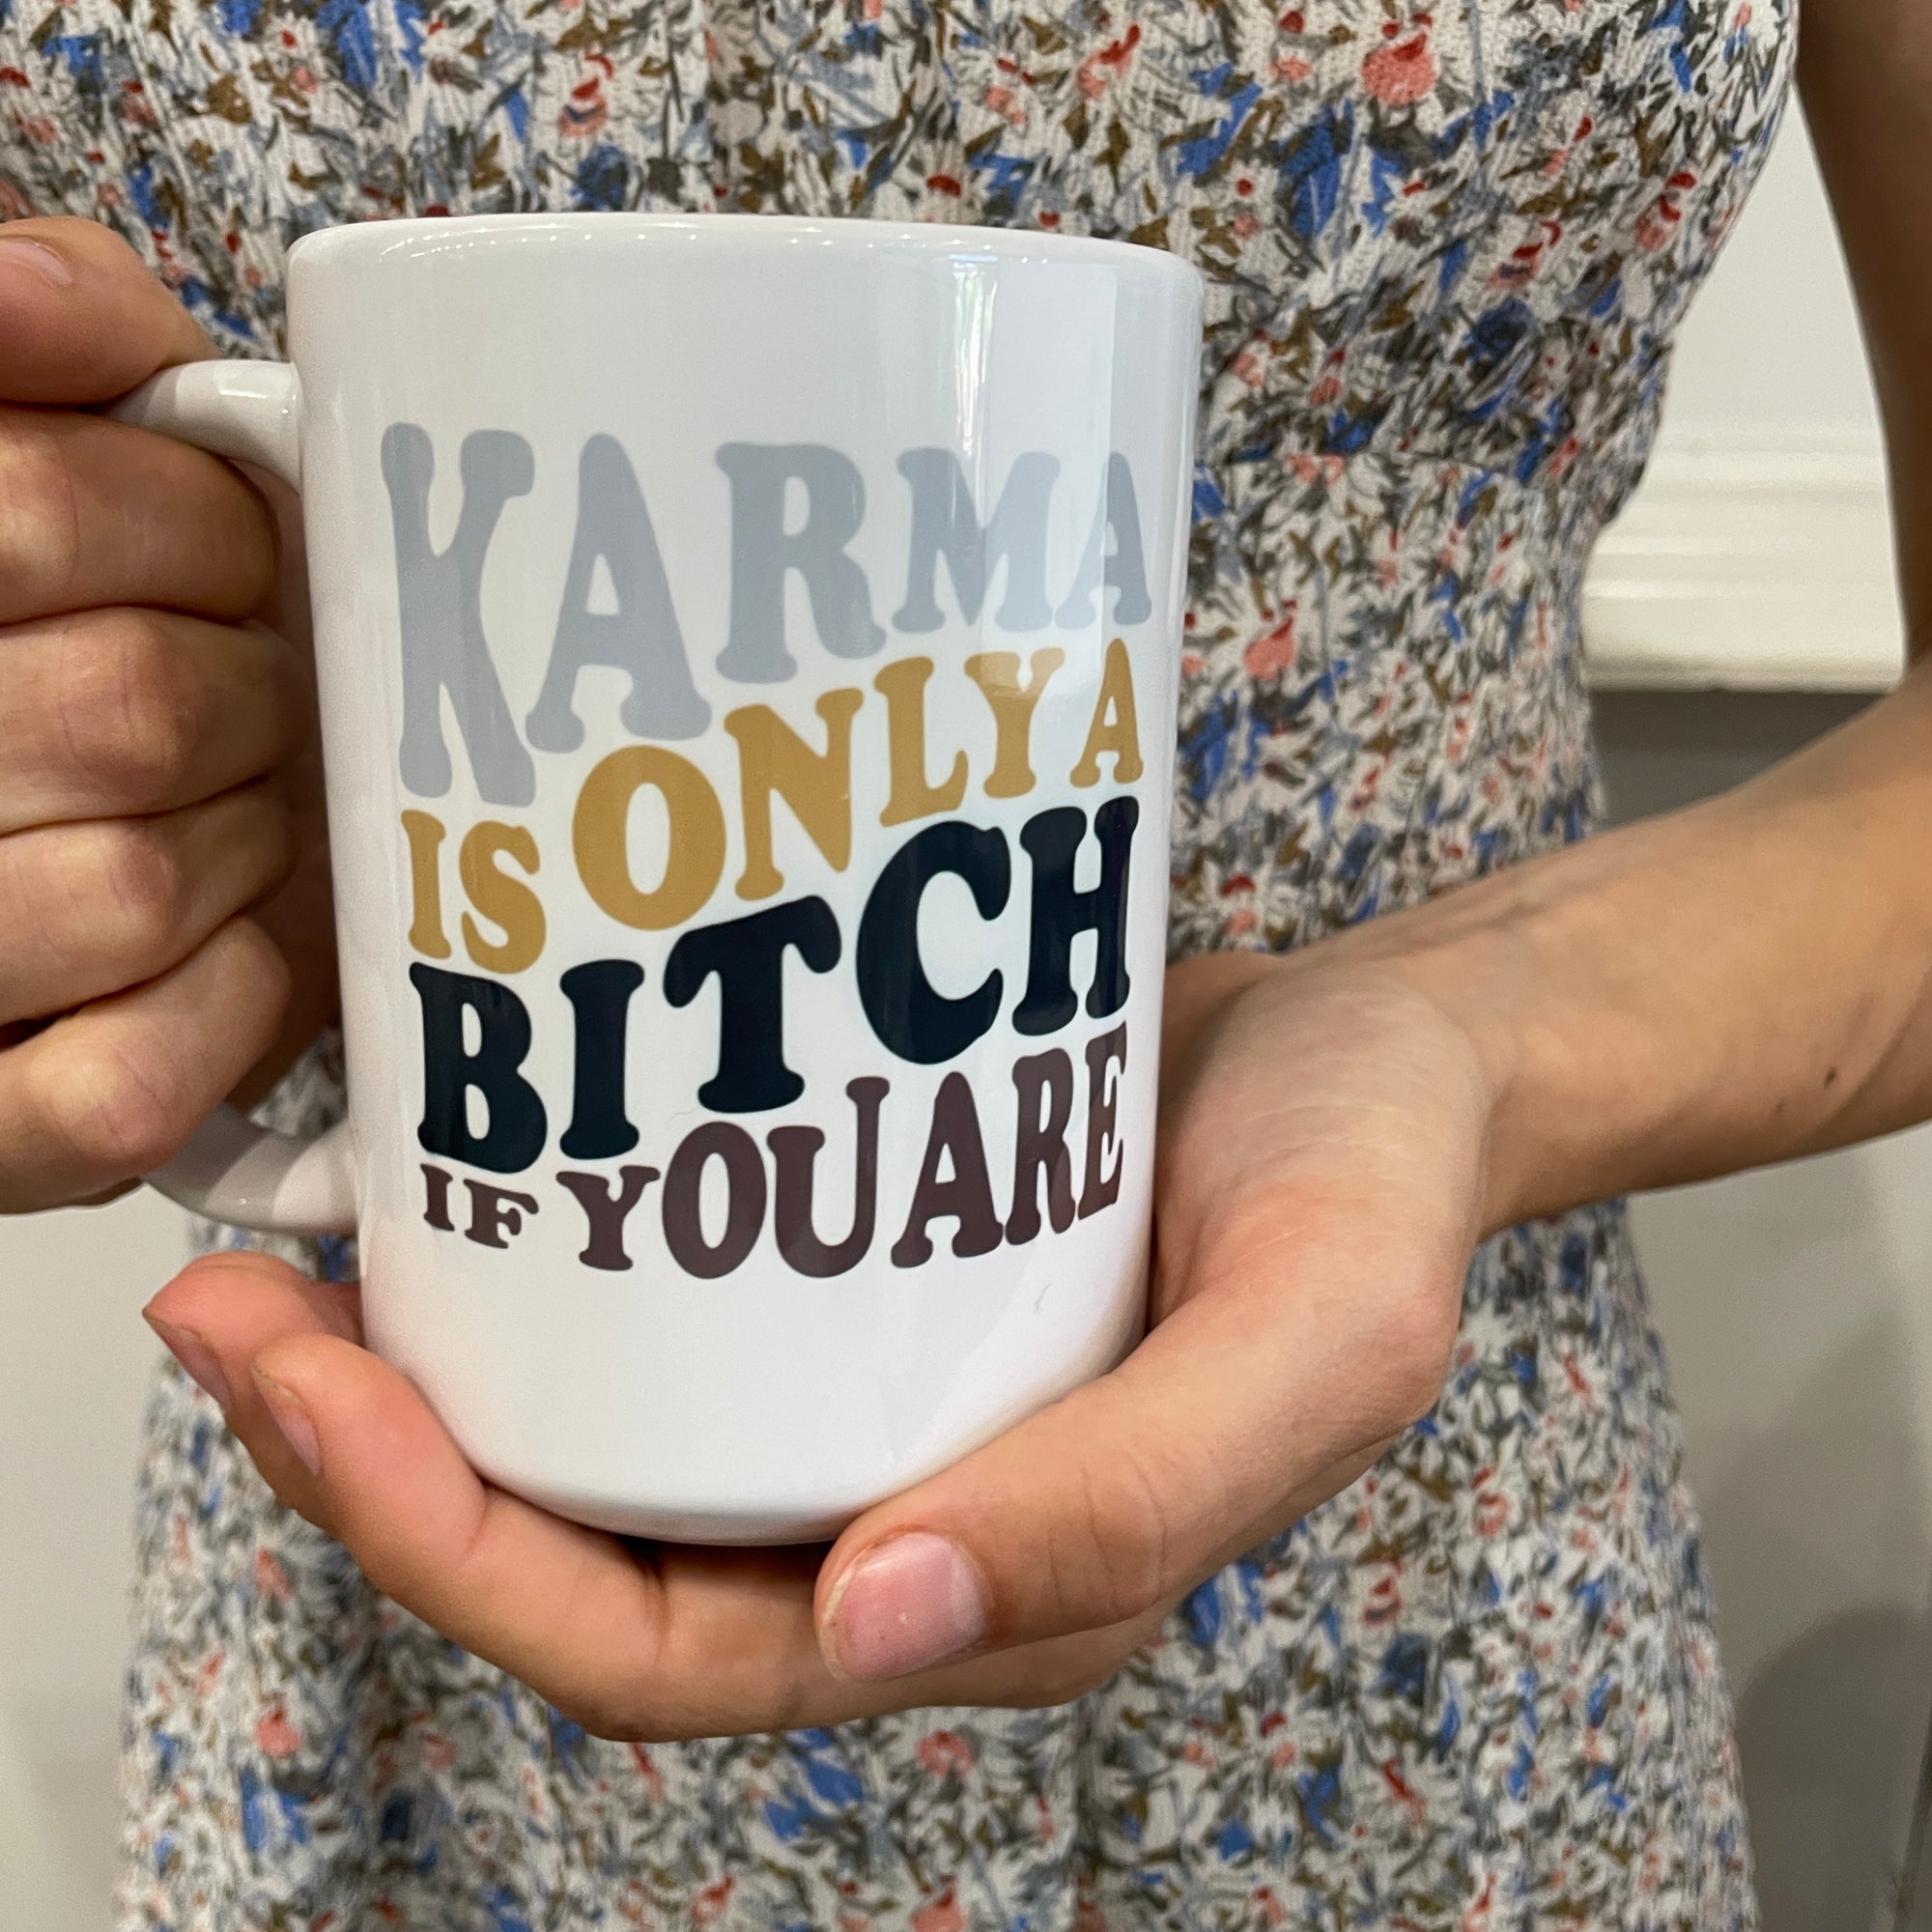 Karma is only a b*tch if you are mug